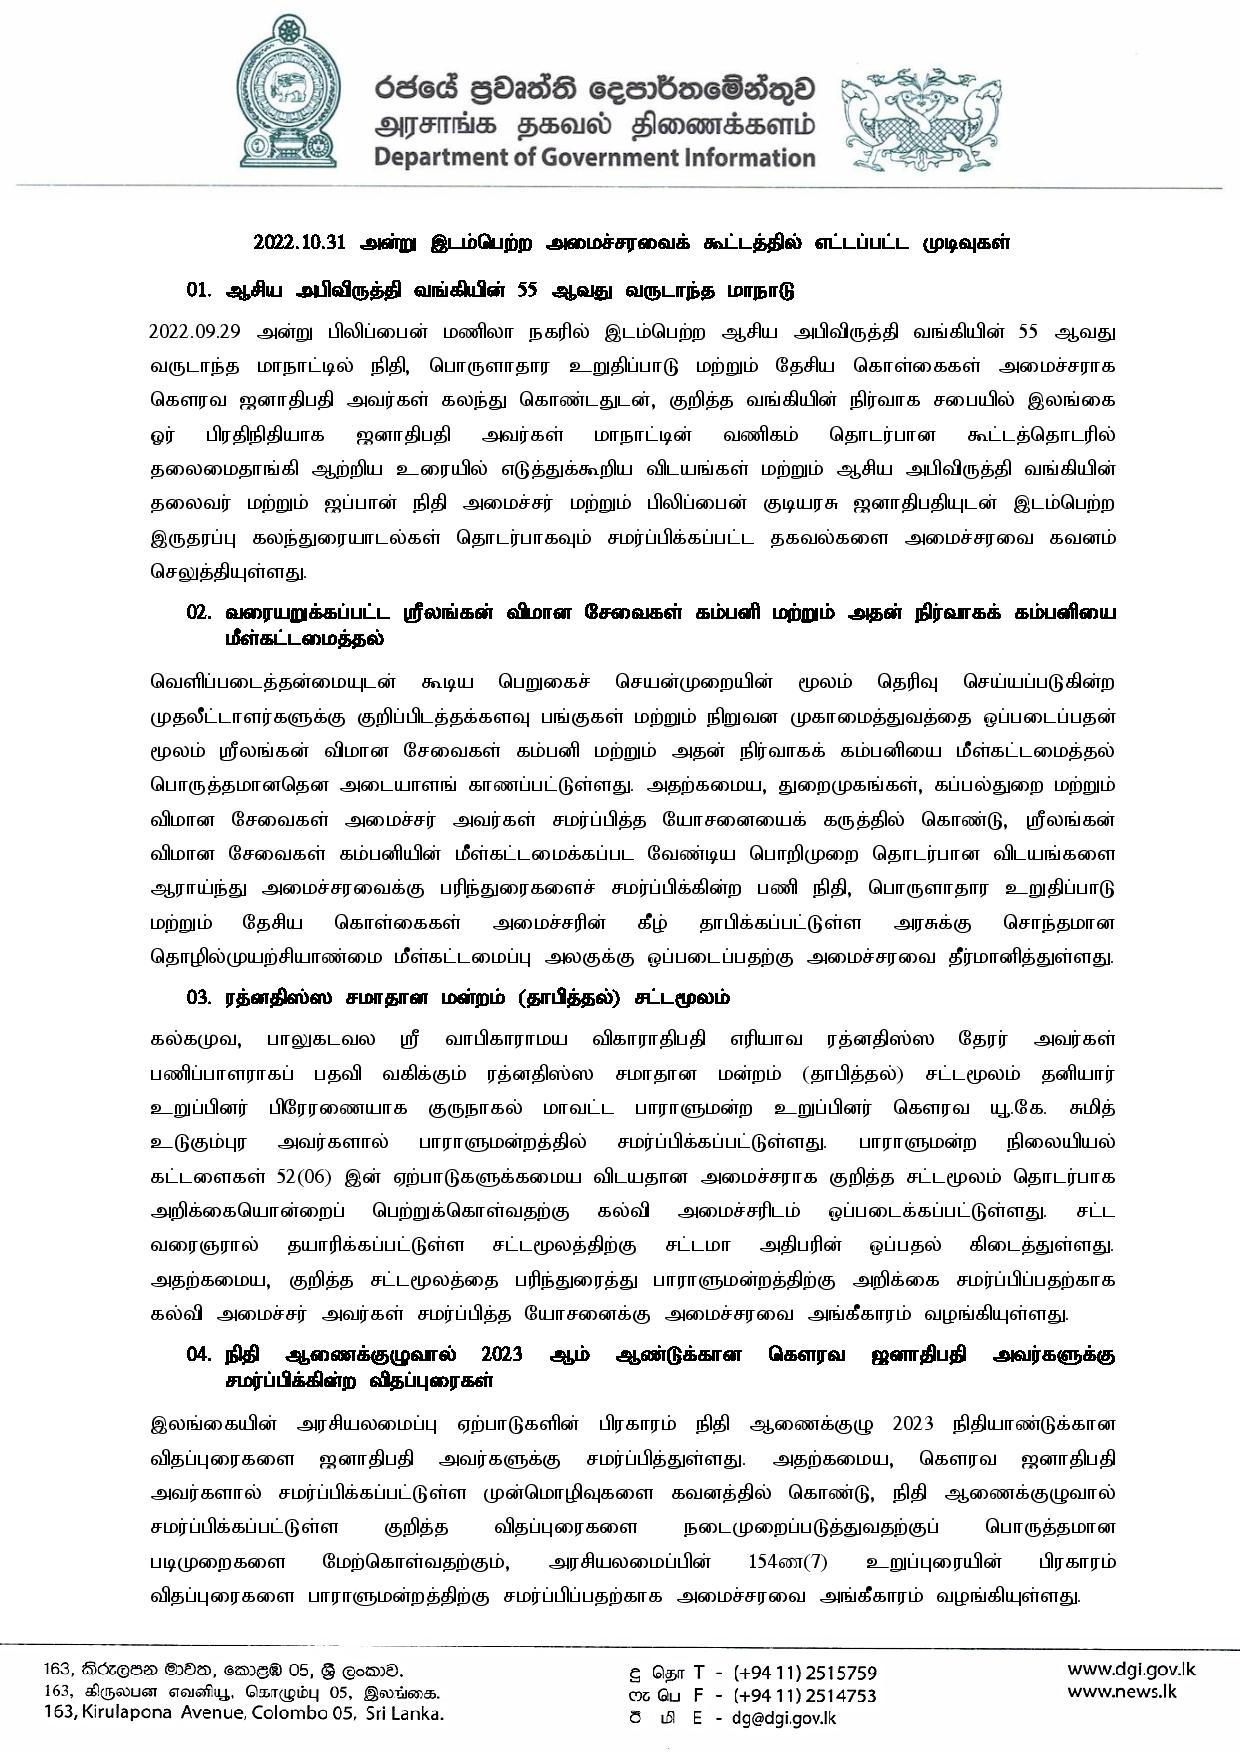 Cabinet Decisions on 31.10.2022 Tamil page 001